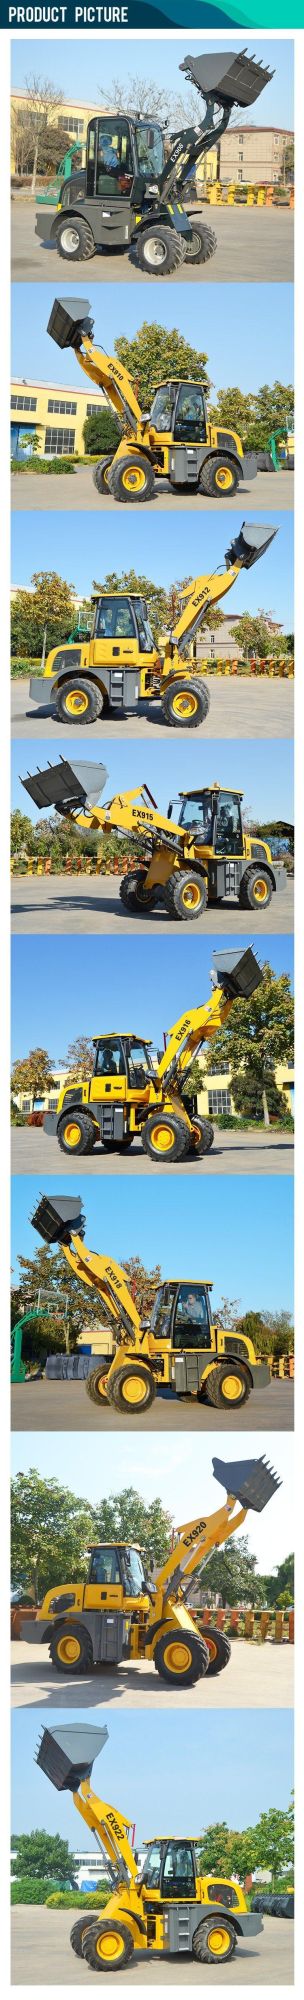 New Huaya Loader Mini Small Front End Loaders for Sale